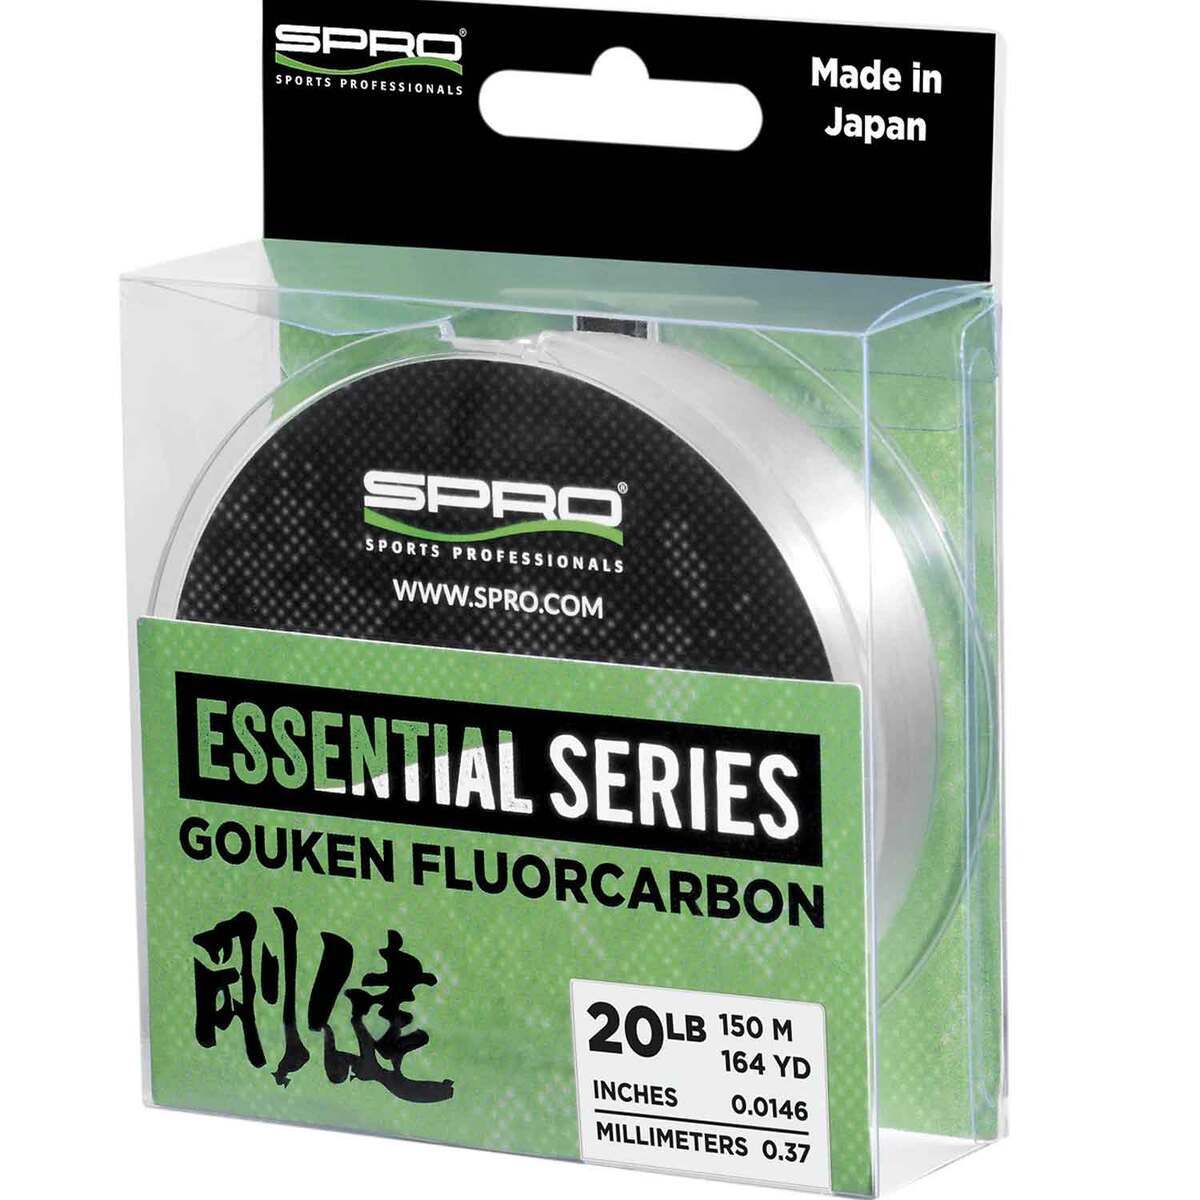 NEW For 2021: SPRO Fluorocarbon Gouken Line Is Tough As, 59% OFF